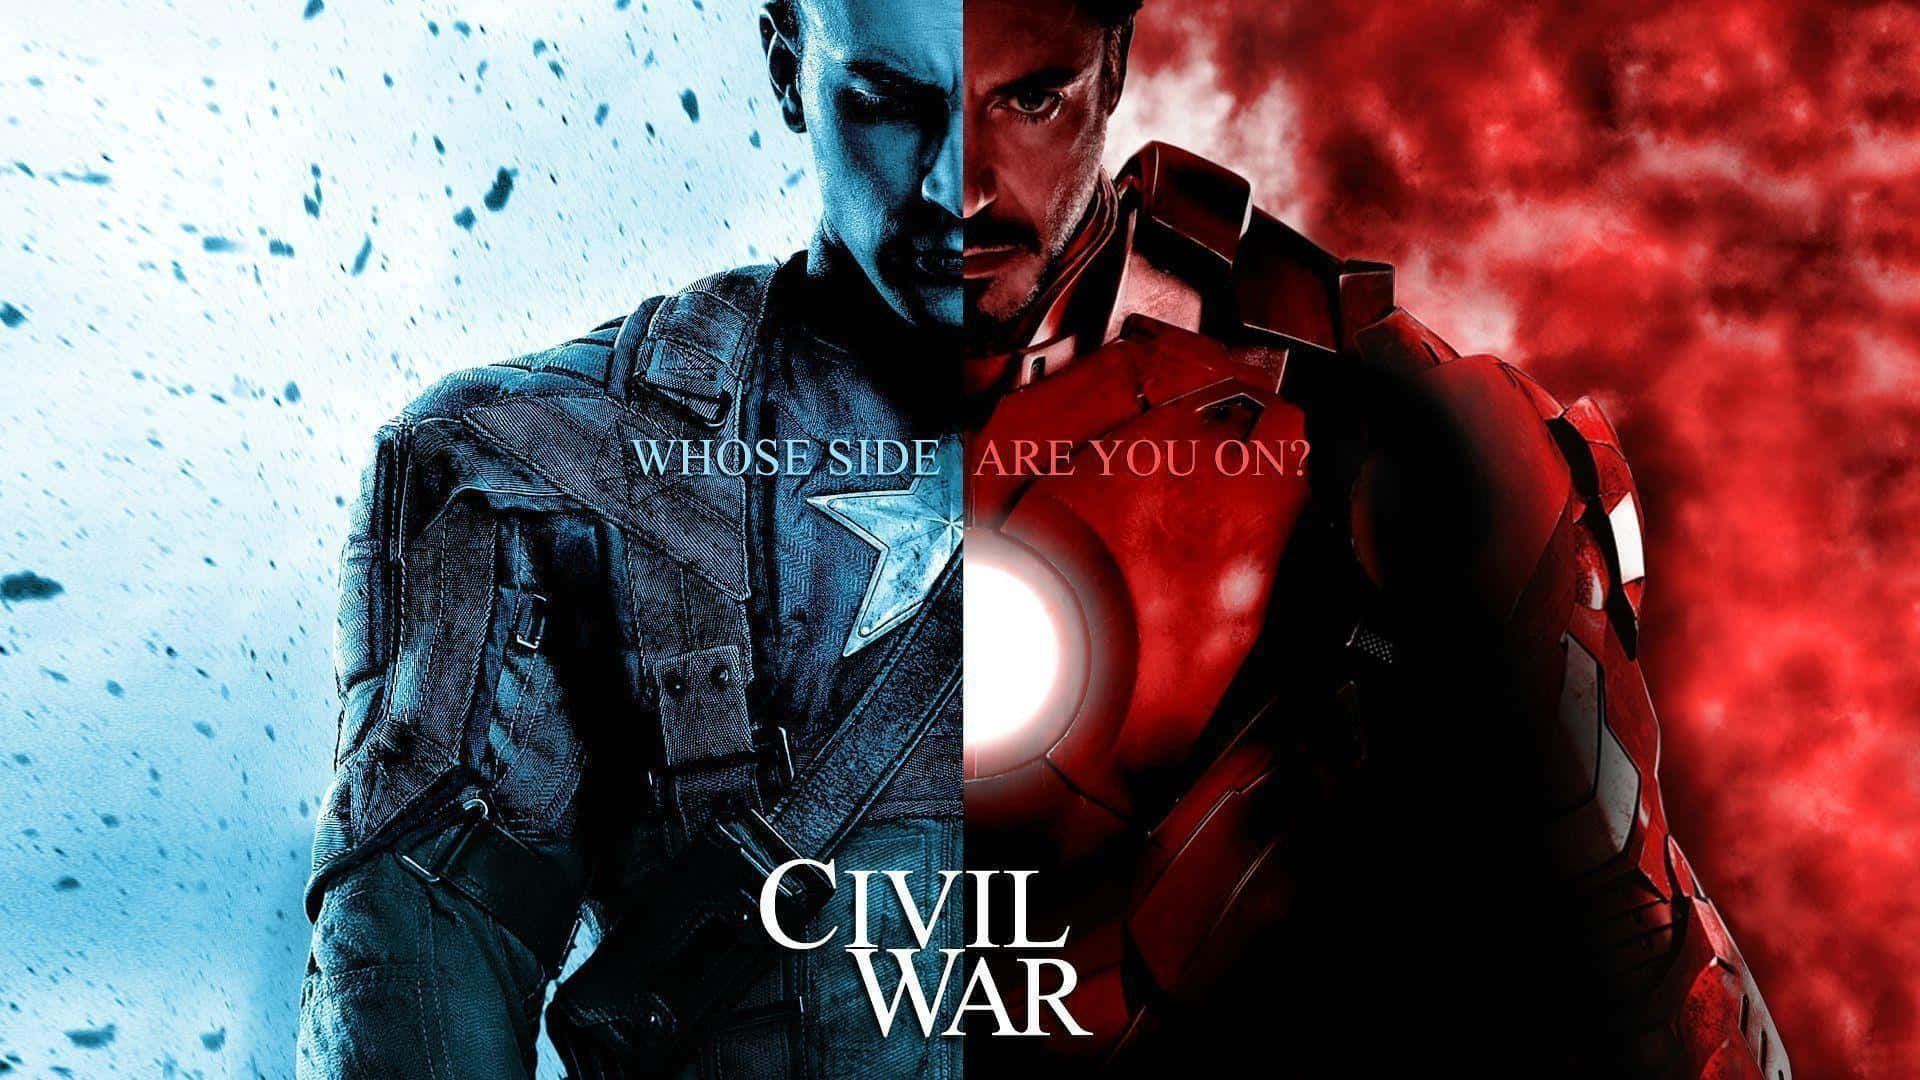 Iron Man and Captain America face off in a historic battle. Wallpaper